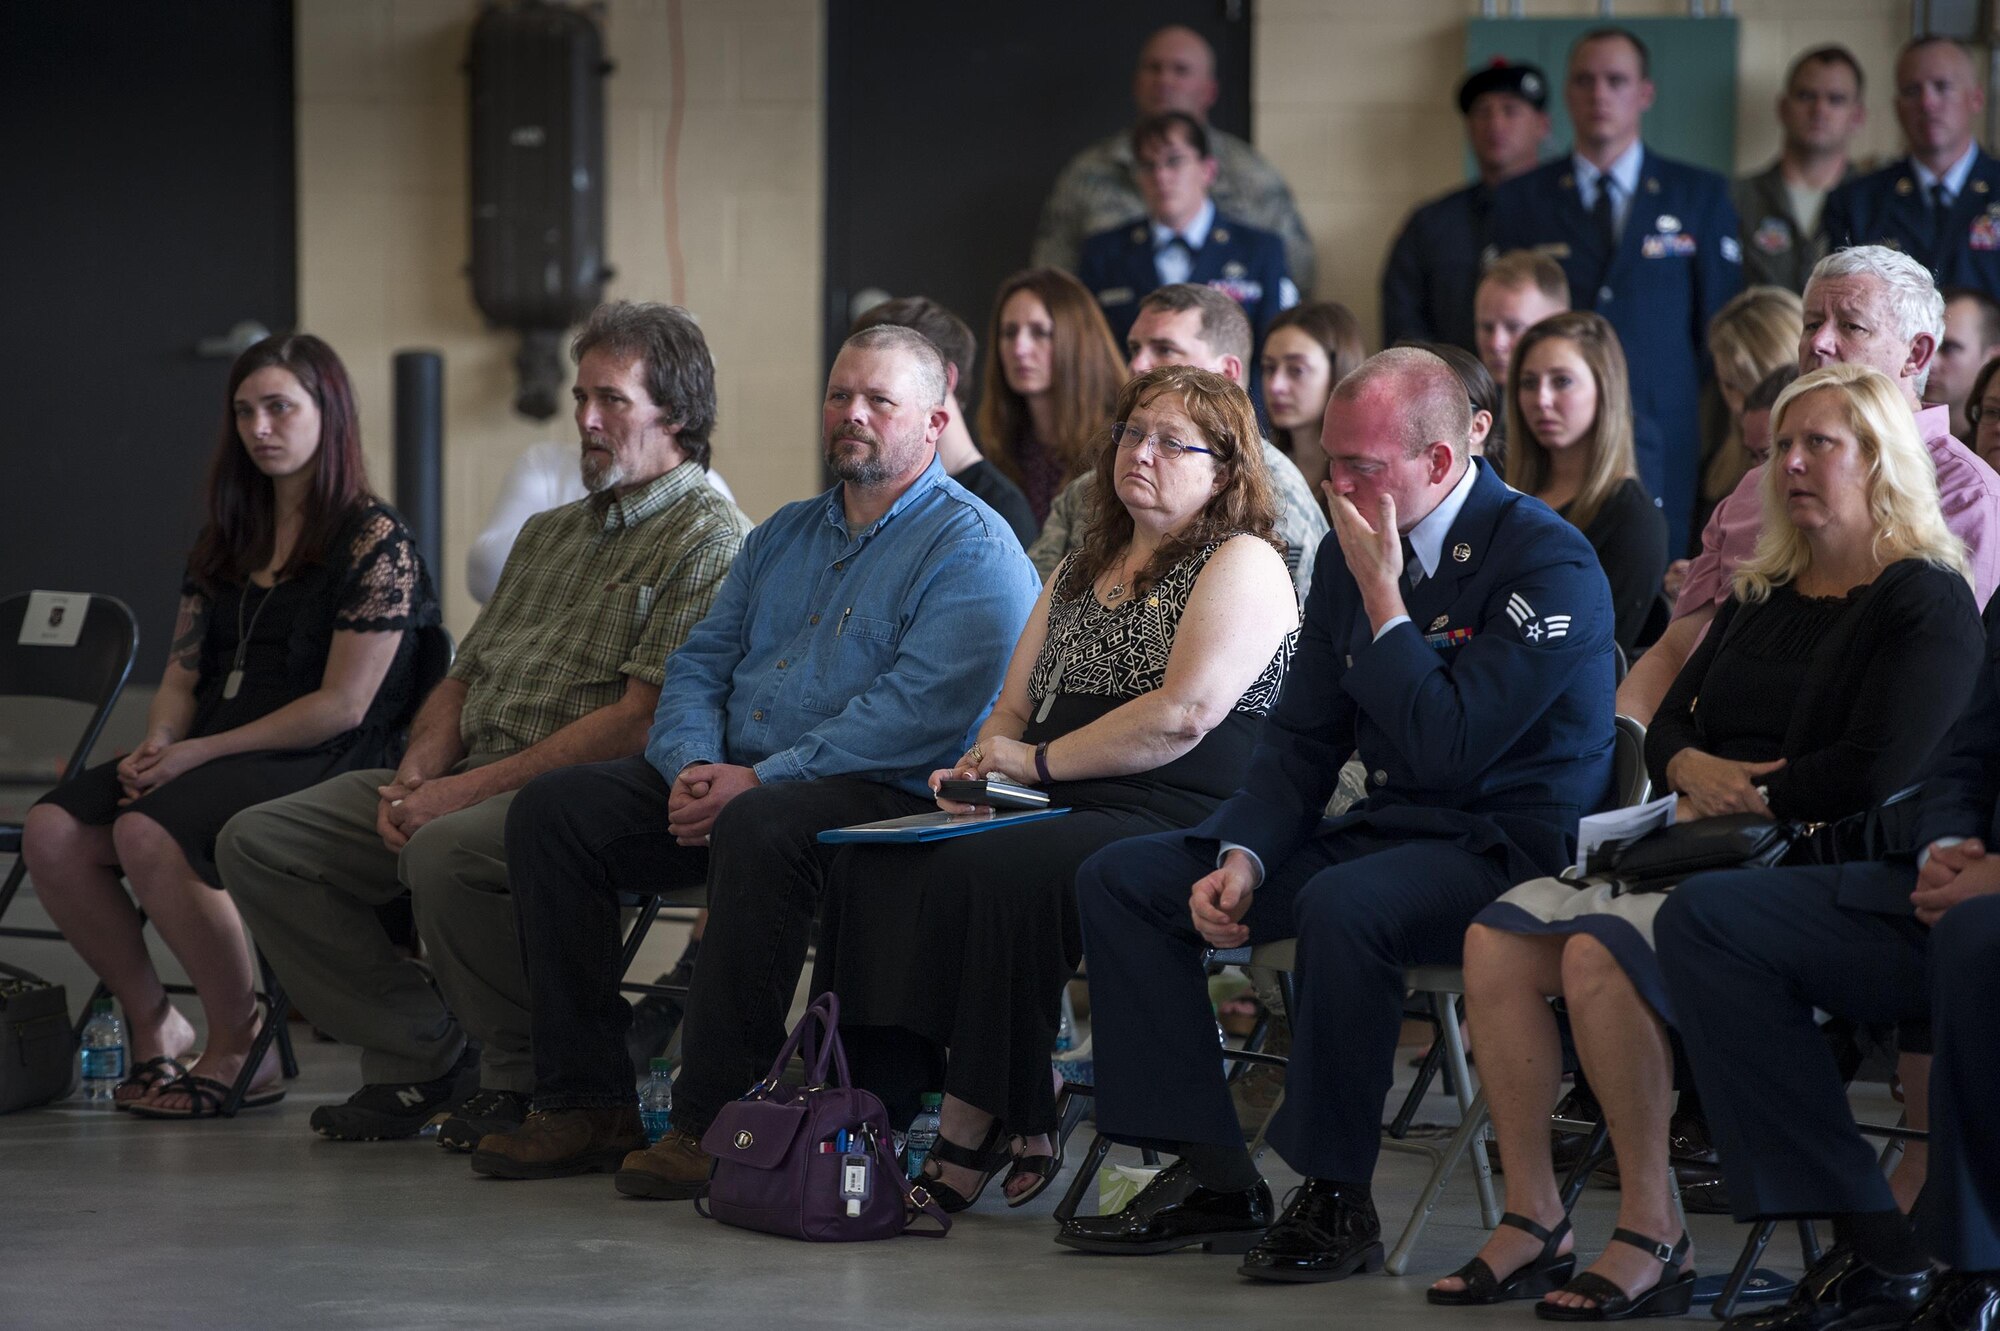 Family of the late Staff Sgt. Sara Toy, 74th Aircraft Maintenance Unit weapons team chief, reflect during a memorial ceremony, March 1, 2017, at Moody Air Force Base, Ga. Toy, a New Kent, Virginia native, died in a car accident Feb. 25, 2017. During the ceremony, she was remembered as a valuable member of the Team Moody weapons community and was posthumously awarded the Air Force Commendation Medal and the rank of Staff Sergeant. (U.S. Air Force photo by Andrea Jenkins/Released)